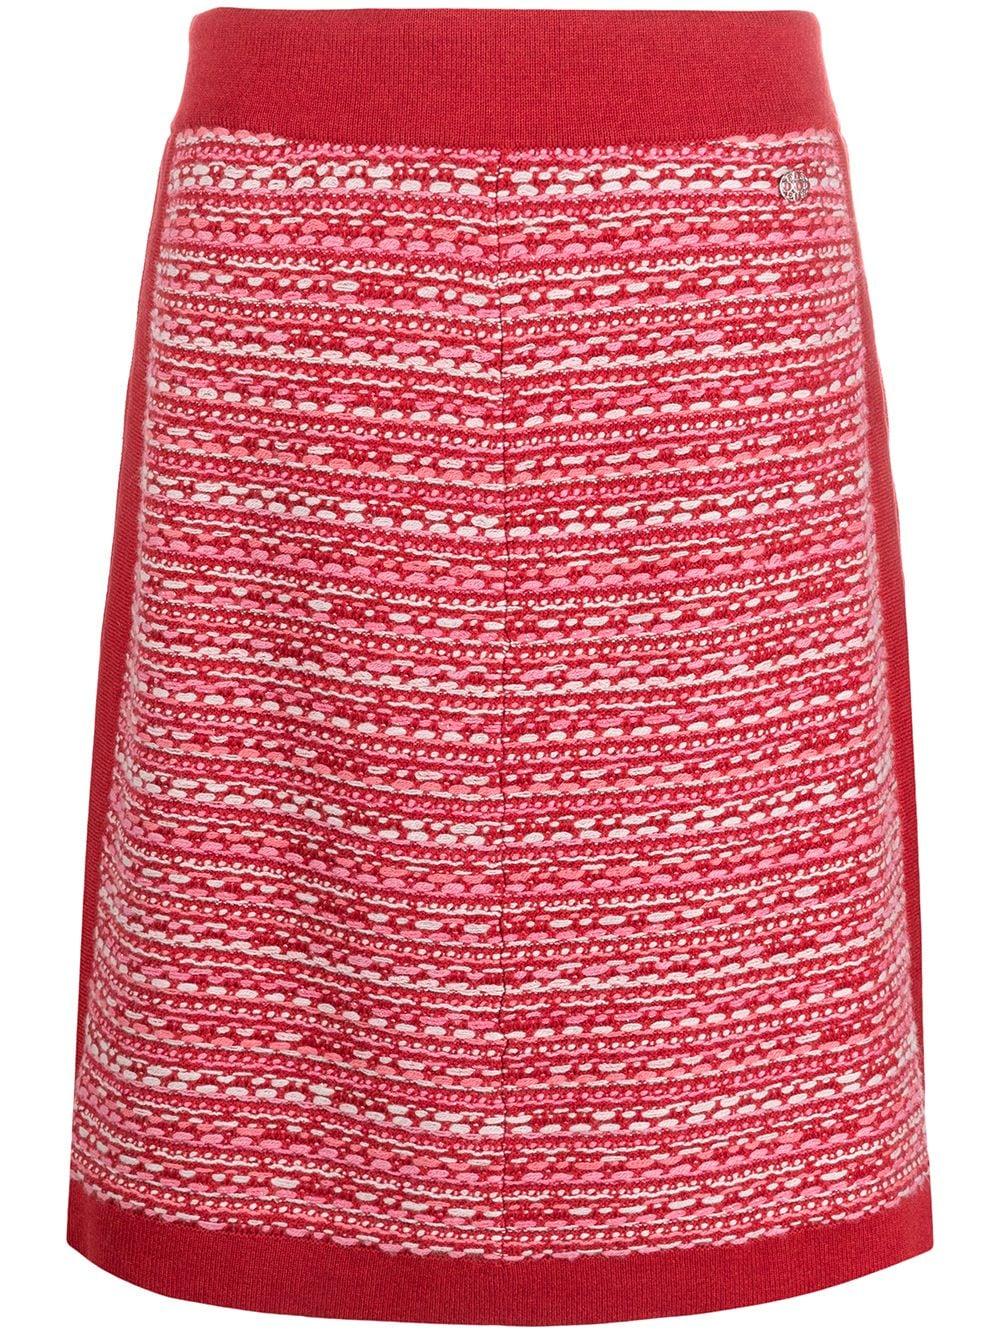 2016s Catwalk Chanel Red Cashmere  Skirt In Excellent Condition For Sale In Paris, FR